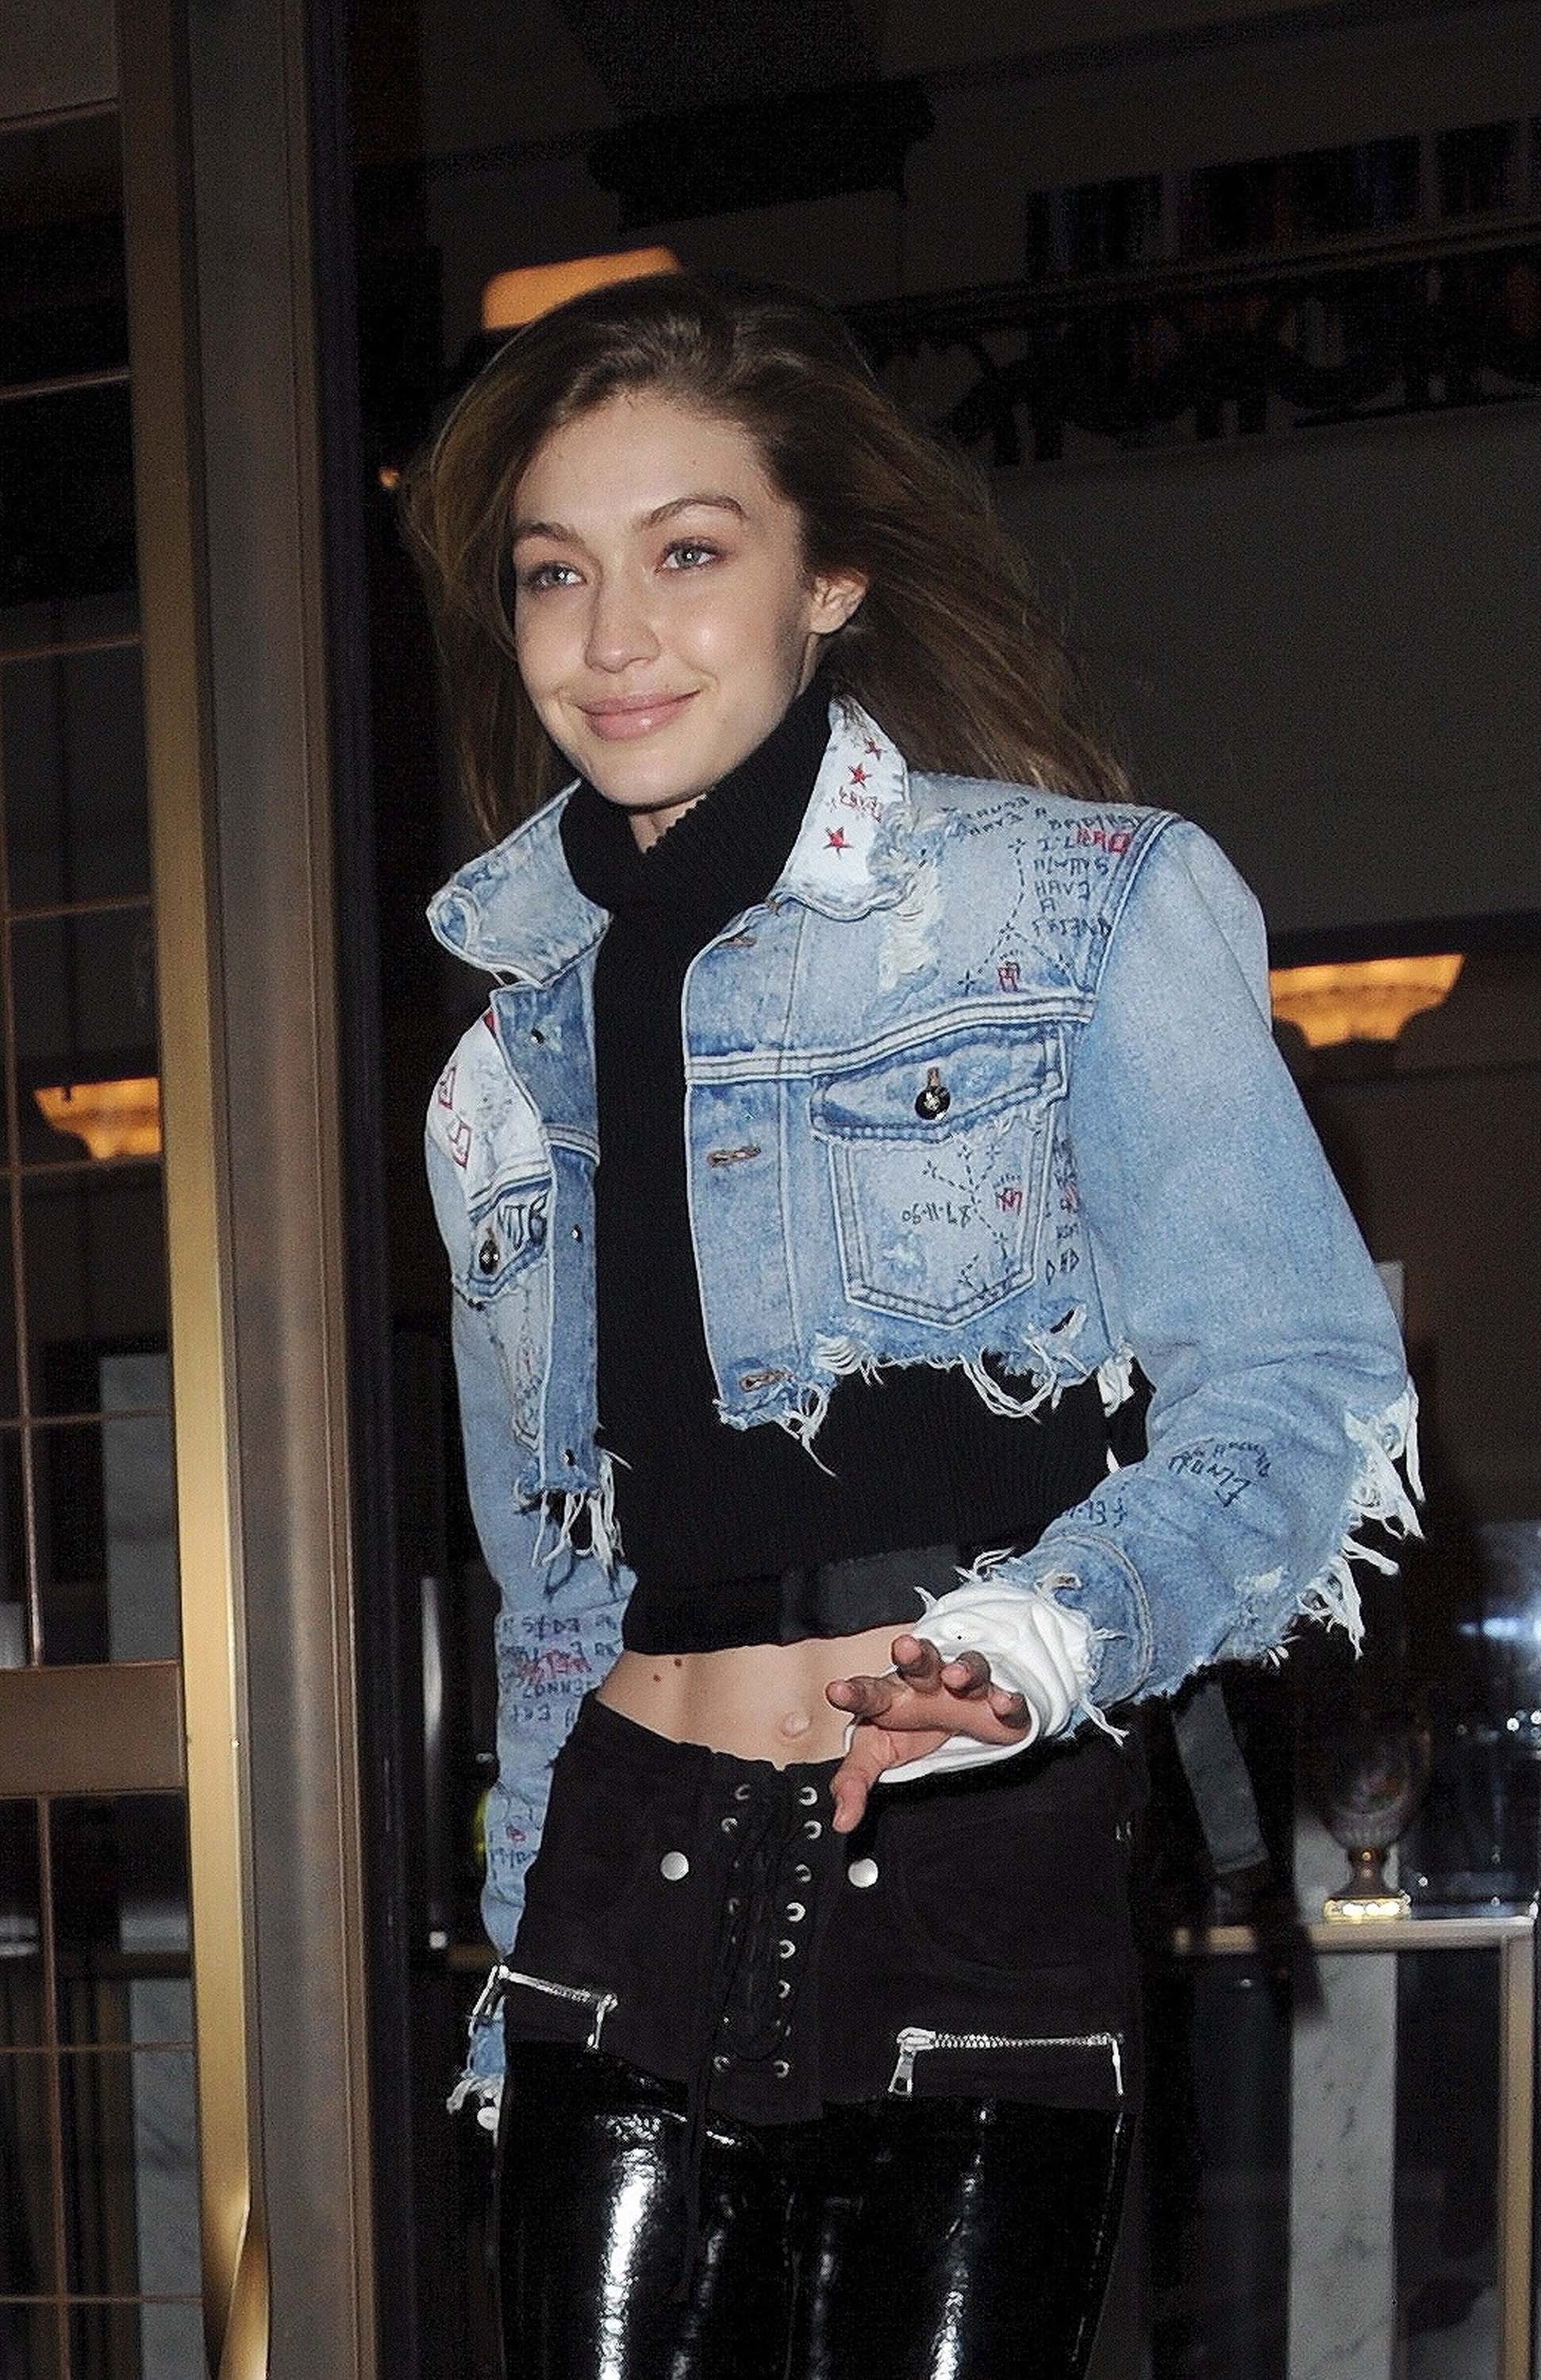 Gigi Hadid leaving her hotel to go to the airport